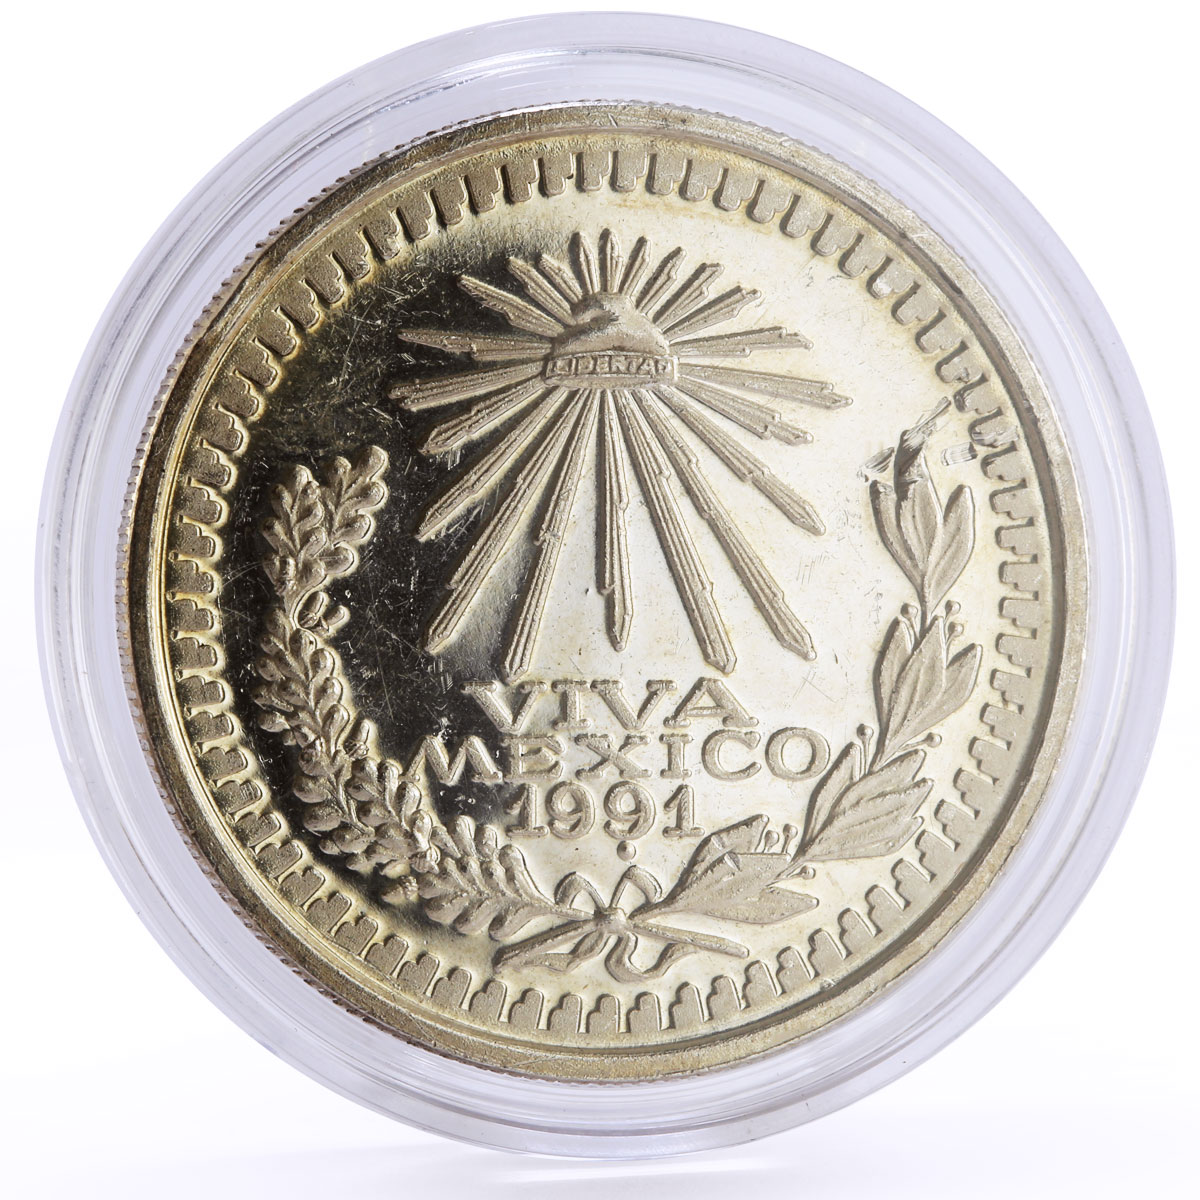 Mexico 1 onza Viva Mexico Libertad Freedom Independence silver coin 1991